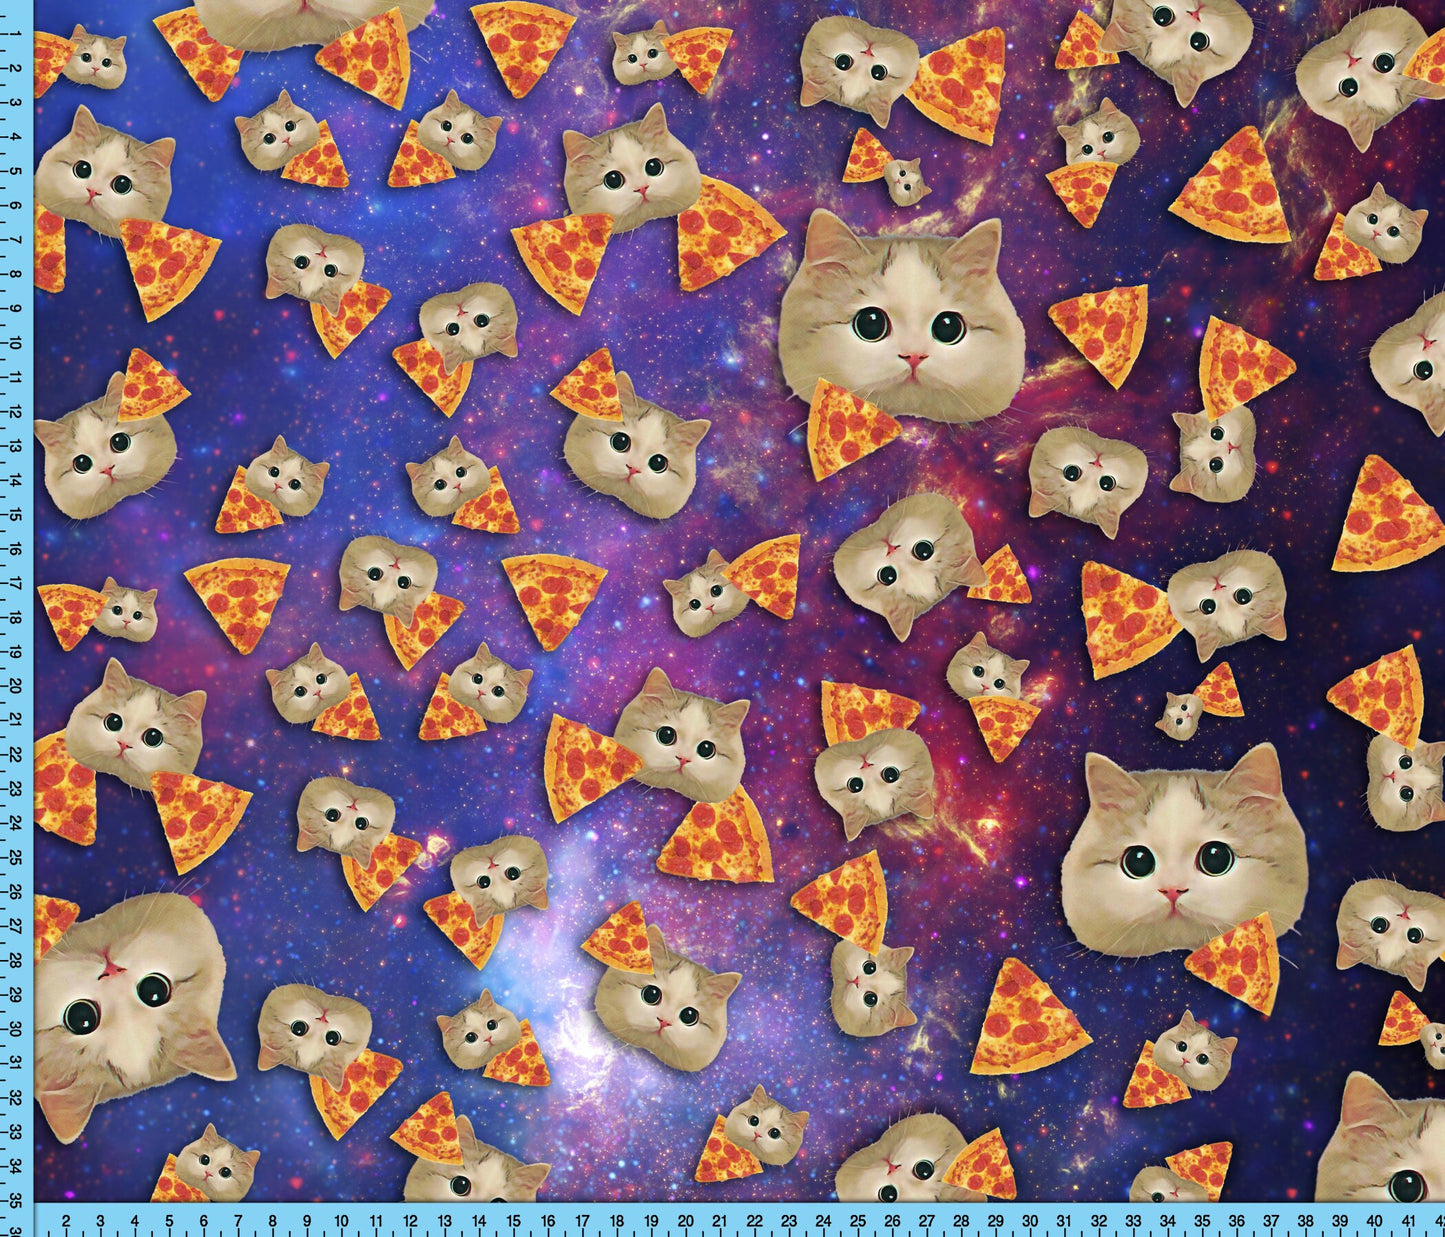 Cute Kittens in Space with Pizza Fabric Printed By the Yard. Broadcloth, Poplin, Gabardine, Liverpool, Clothing and Craft Projects.